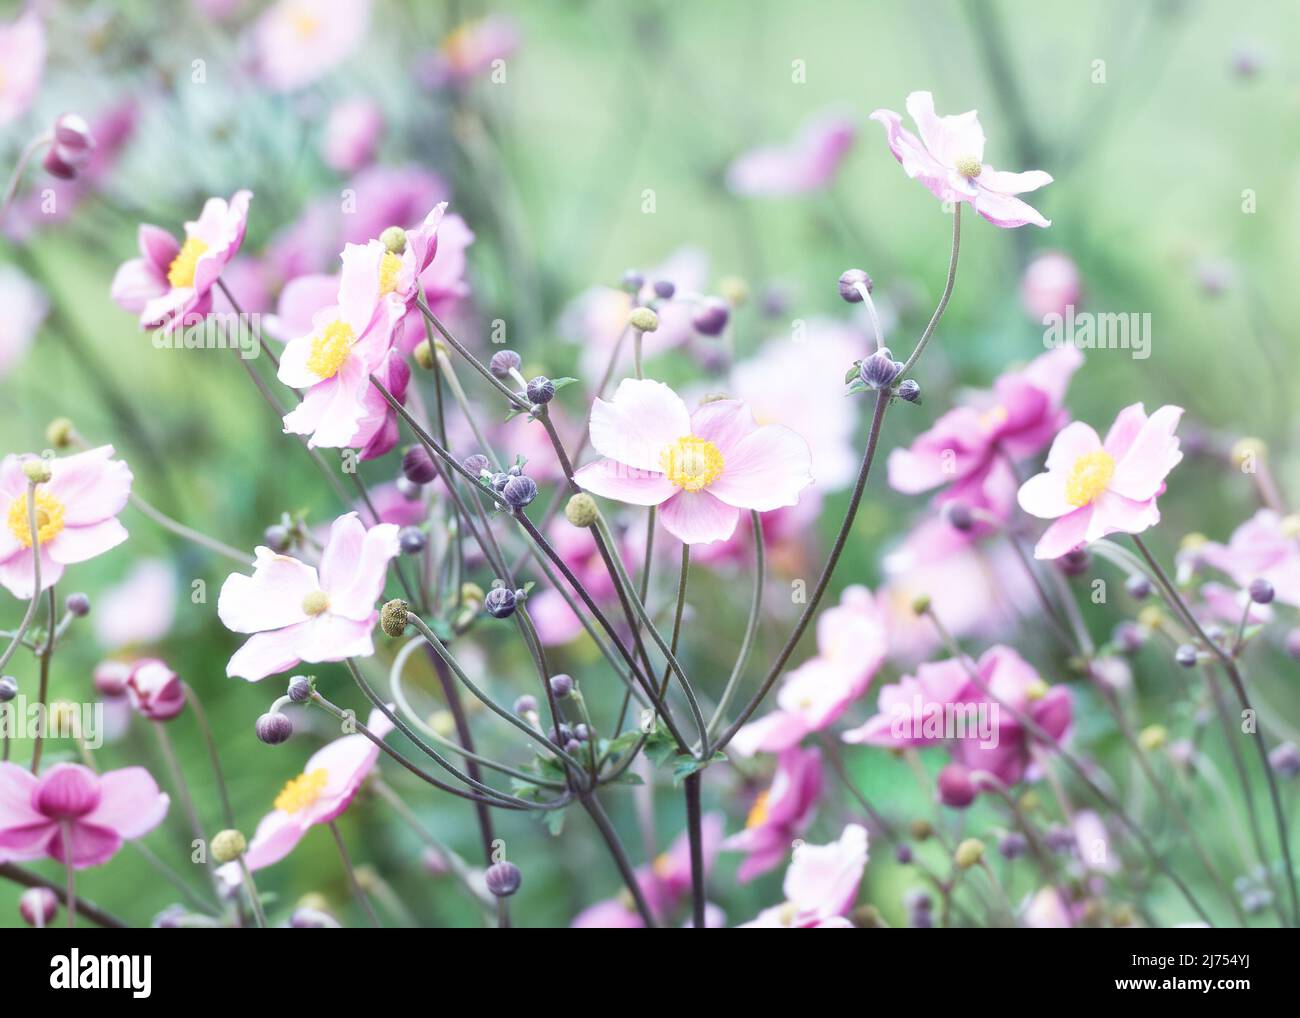 Nature background with spring flowers. (Anemone scabiosa). Selective and soft focus. Copy space. Stock Photo